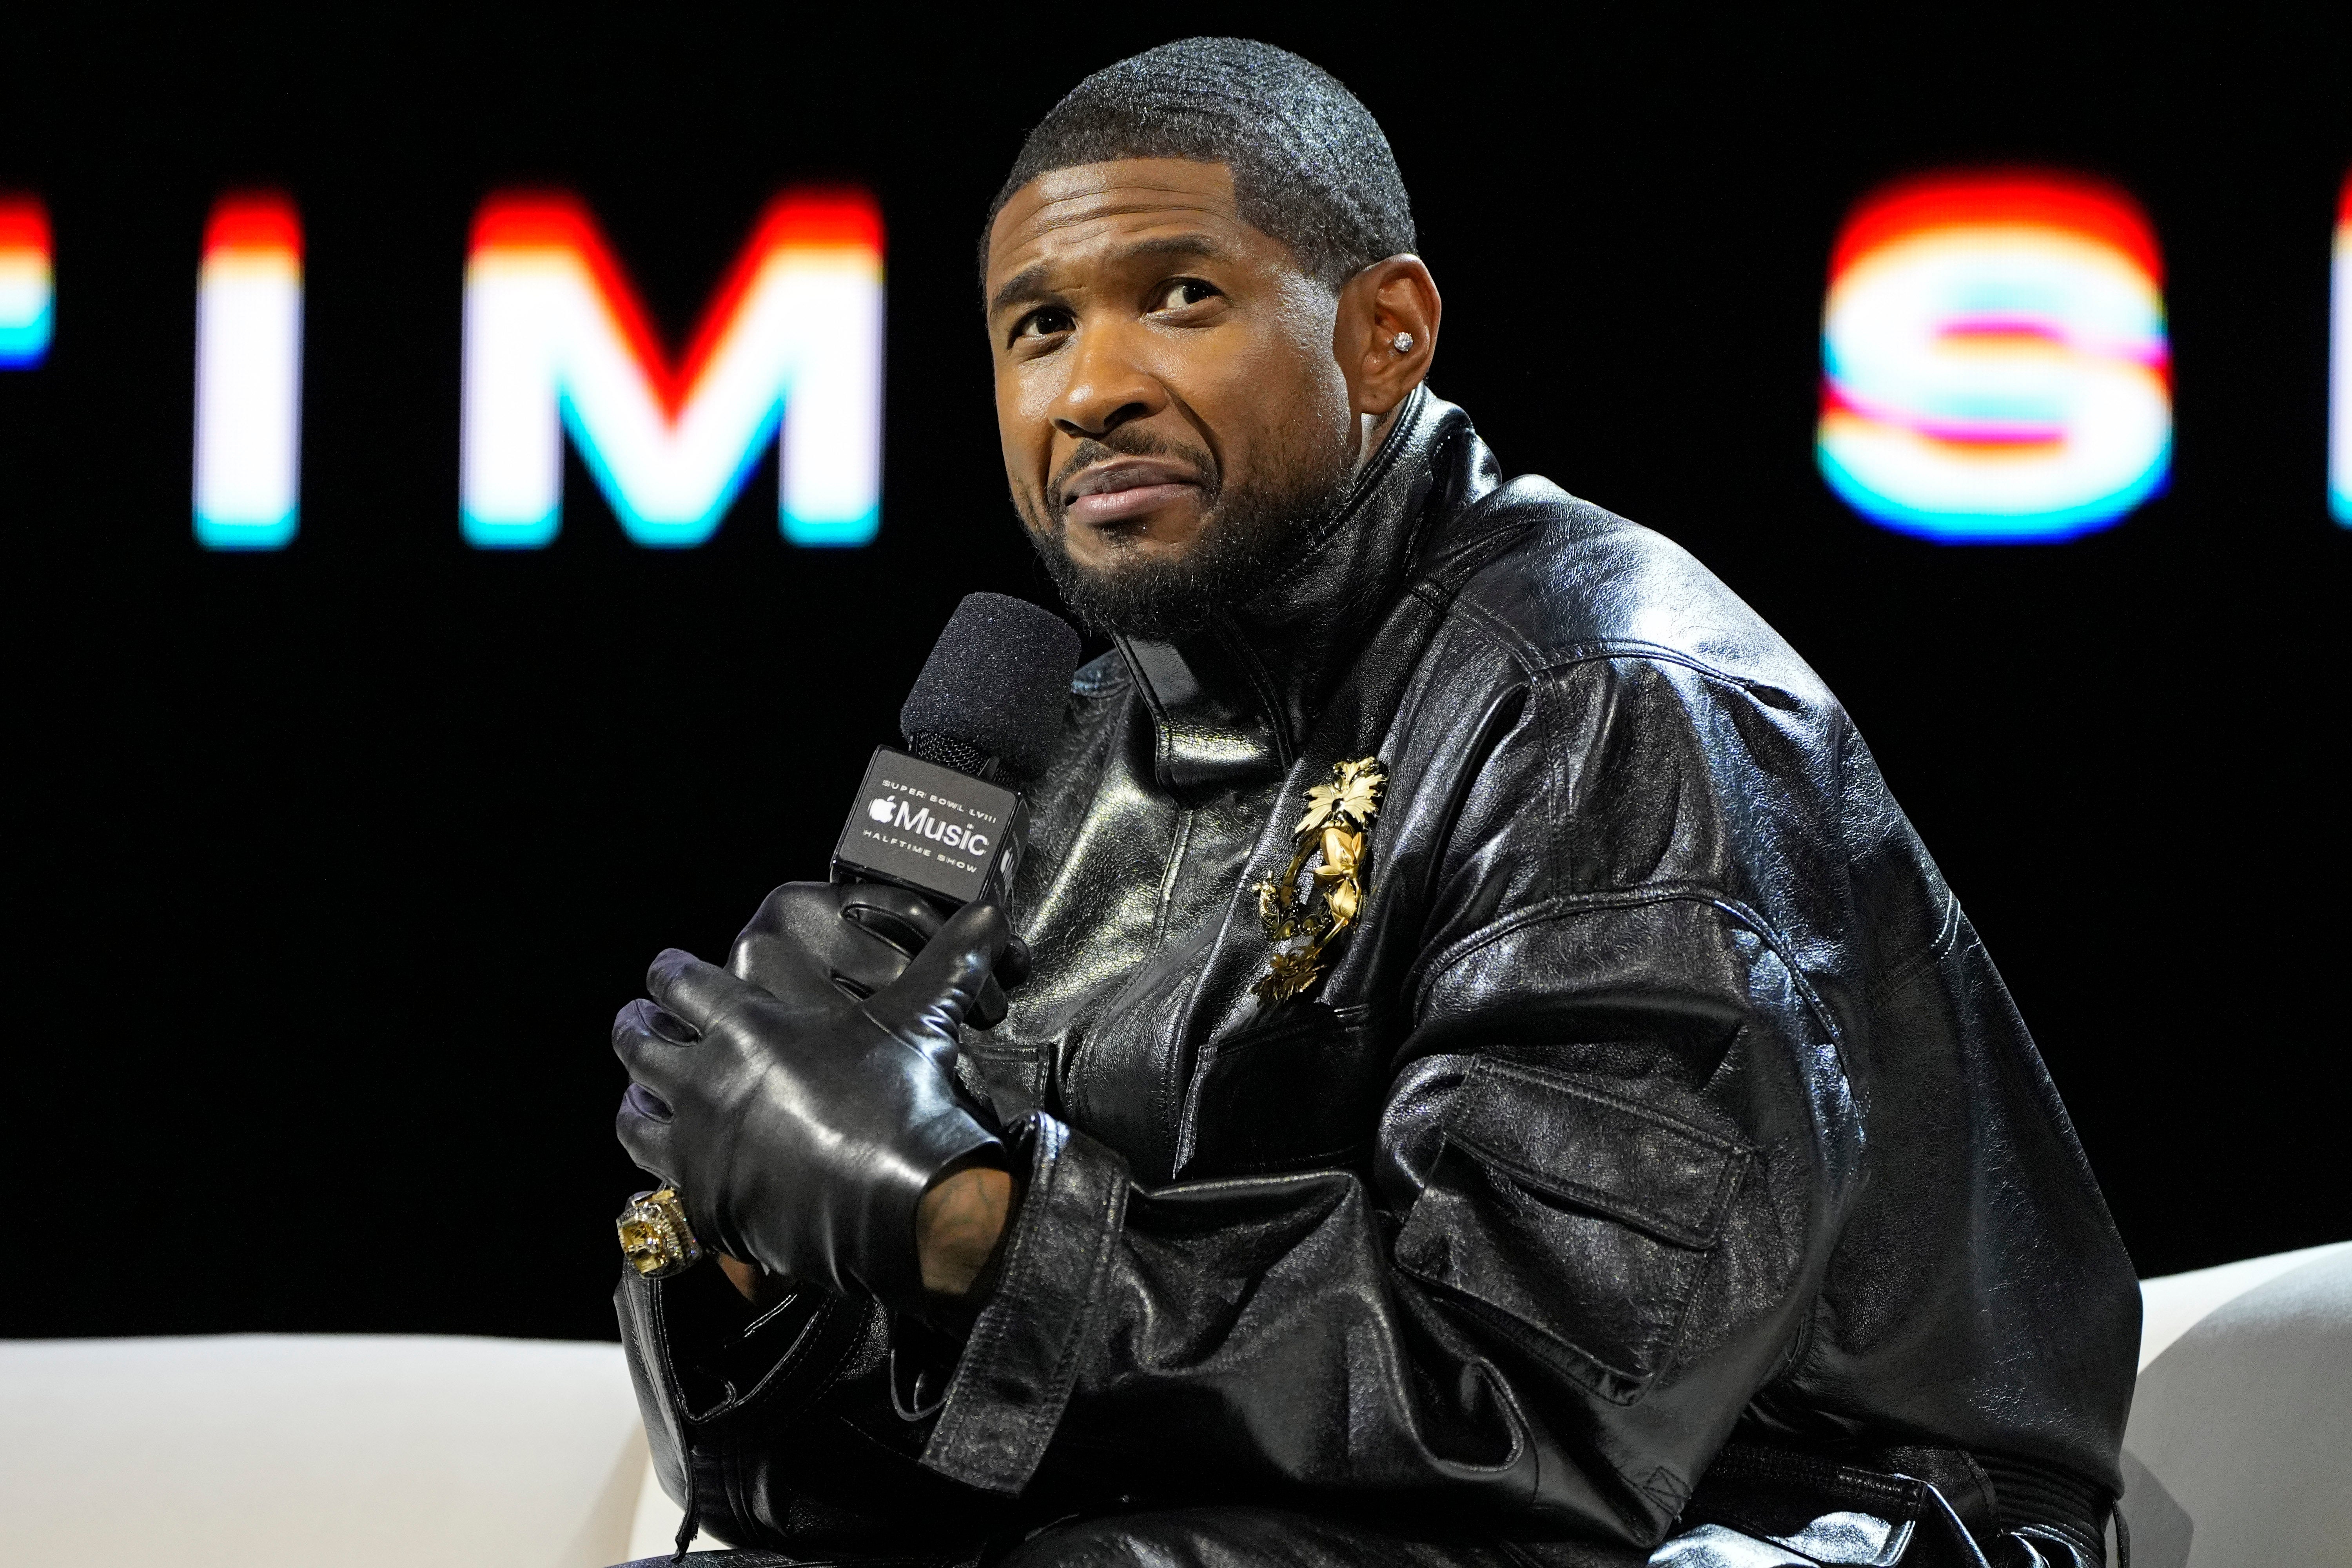 Usher is headlining the Super Bowl halftime show